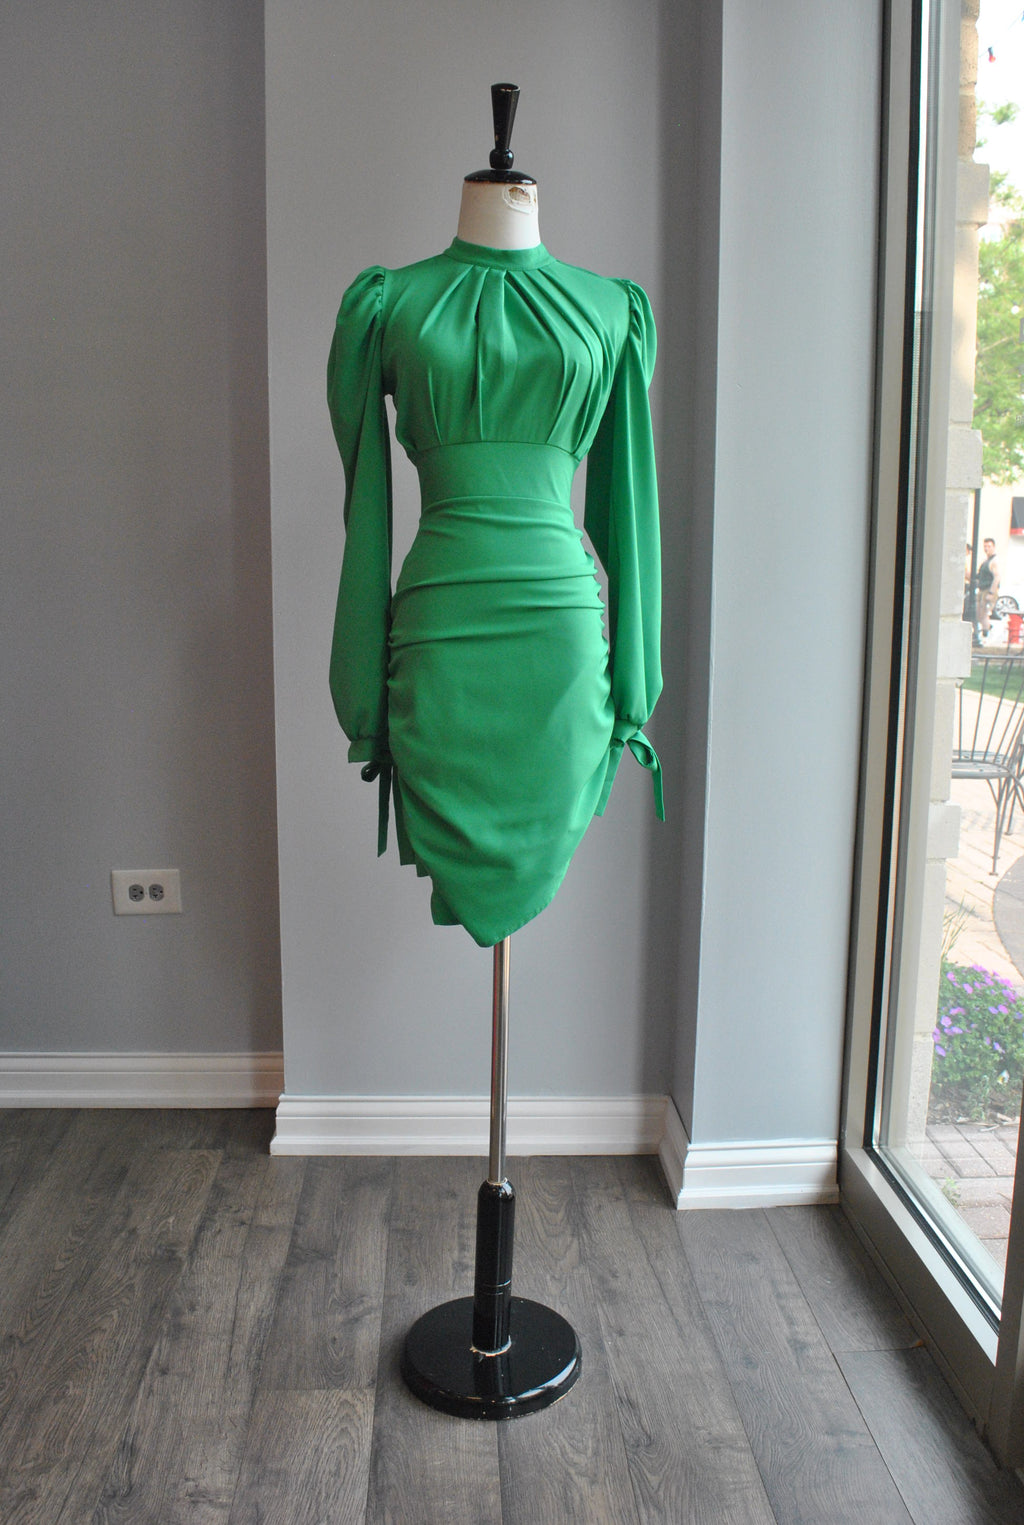 GREEN SUMMER DRESS WITH RUSHING